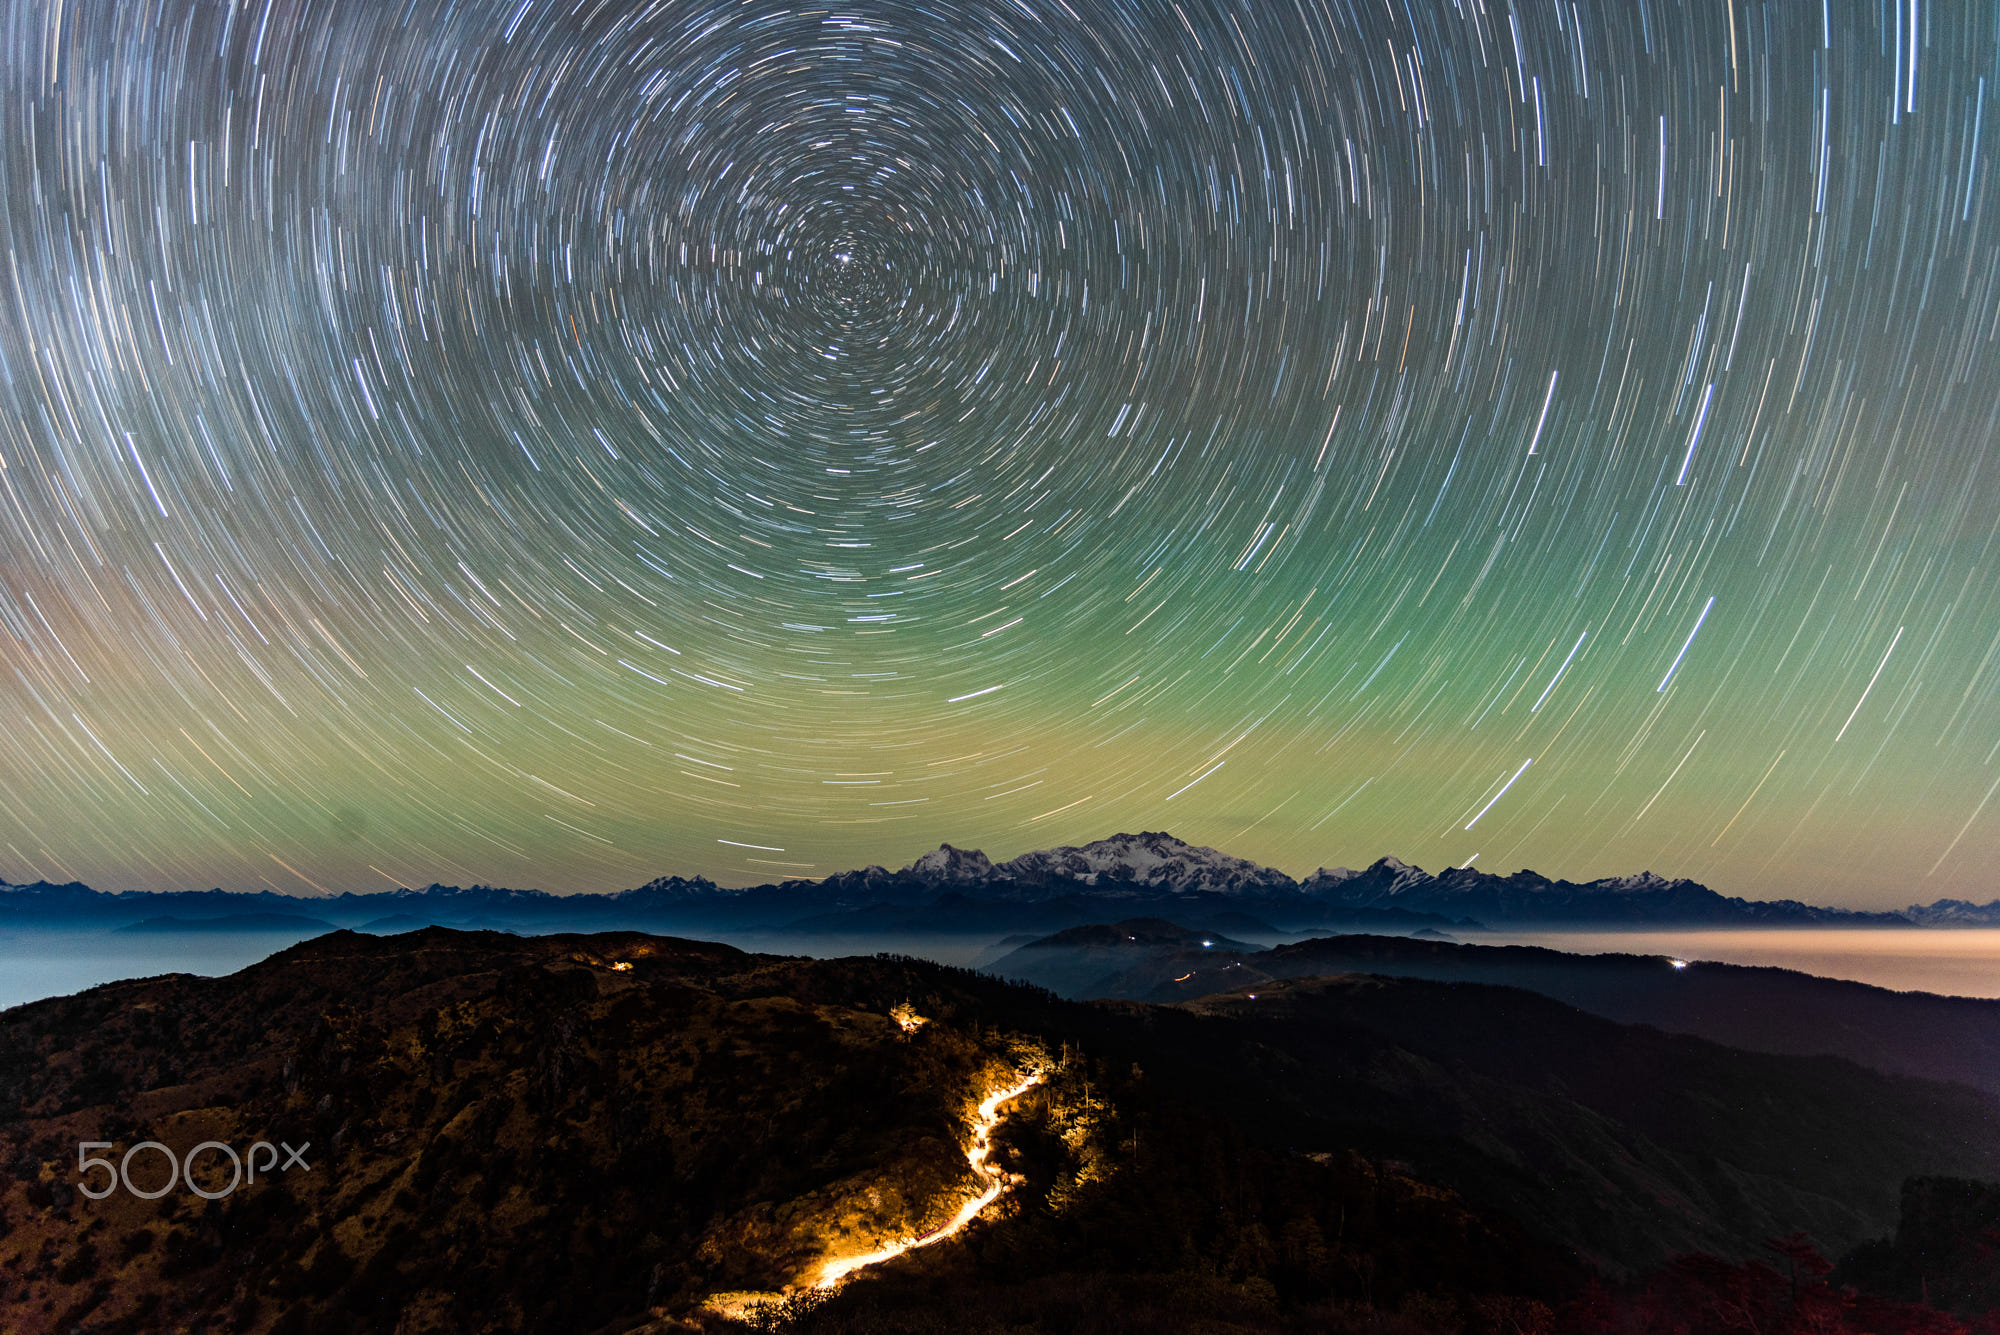 The Star Trail Over Mount Kanchenjunga